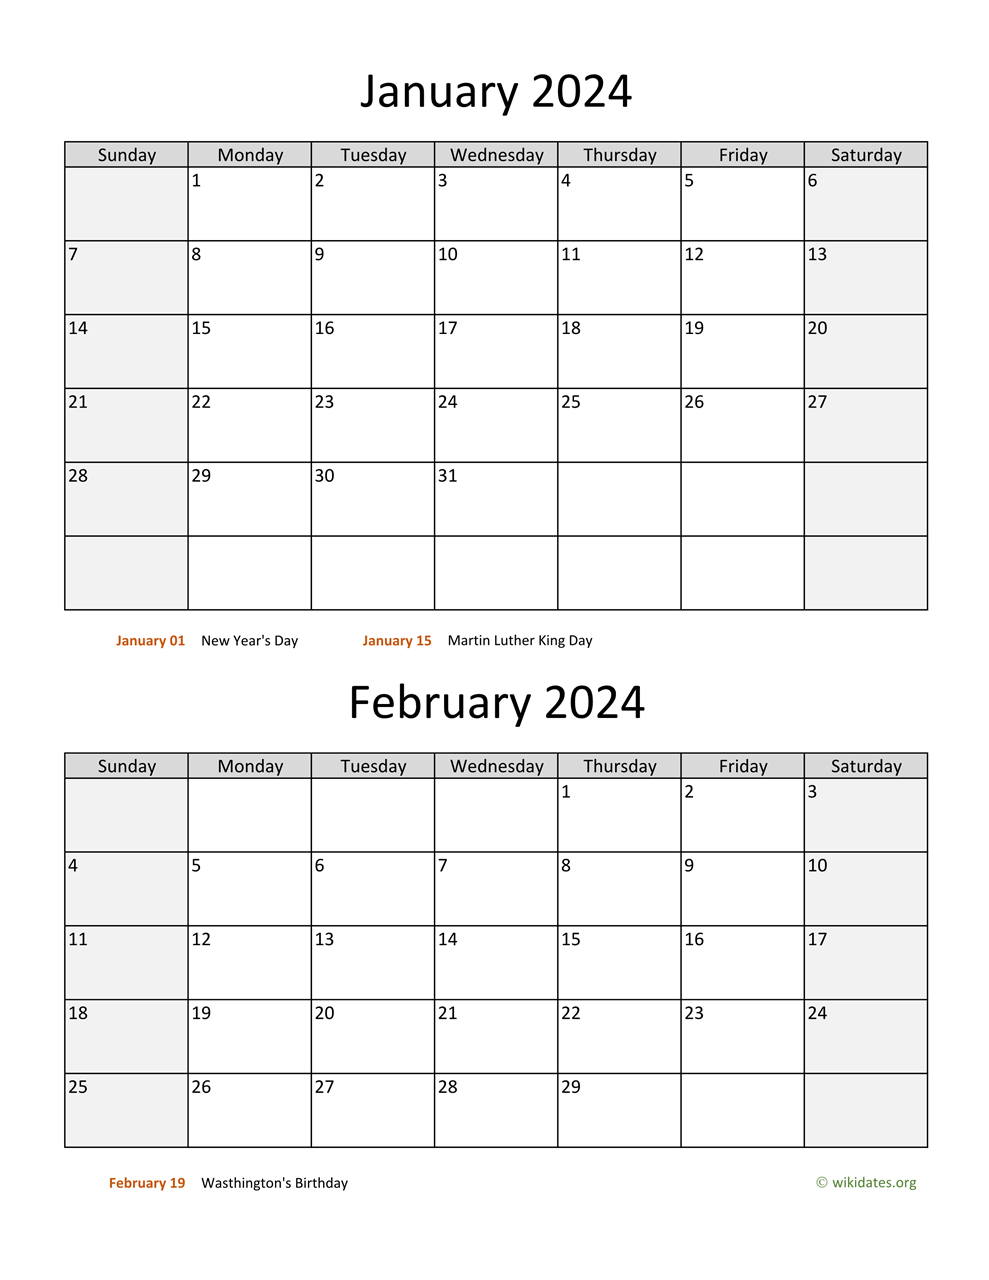 January And February 2024 Calendar | Wikidates for Printable Calendar January And February 2024